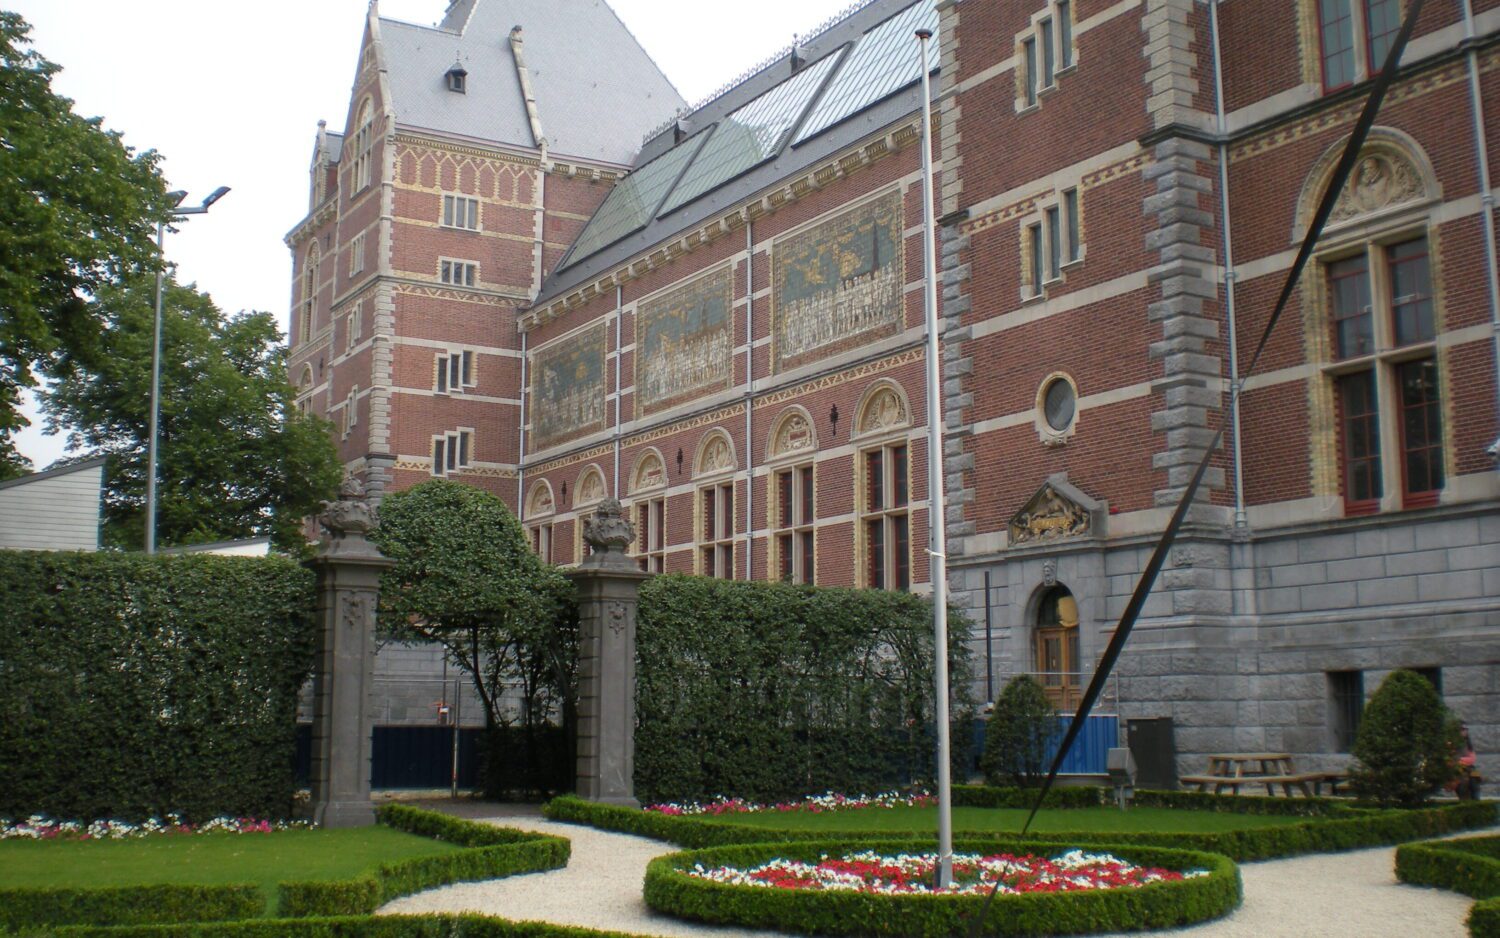 The world famous Rijksmuseum on Amsterdam's Museum Plein - home to the Dutch Masters